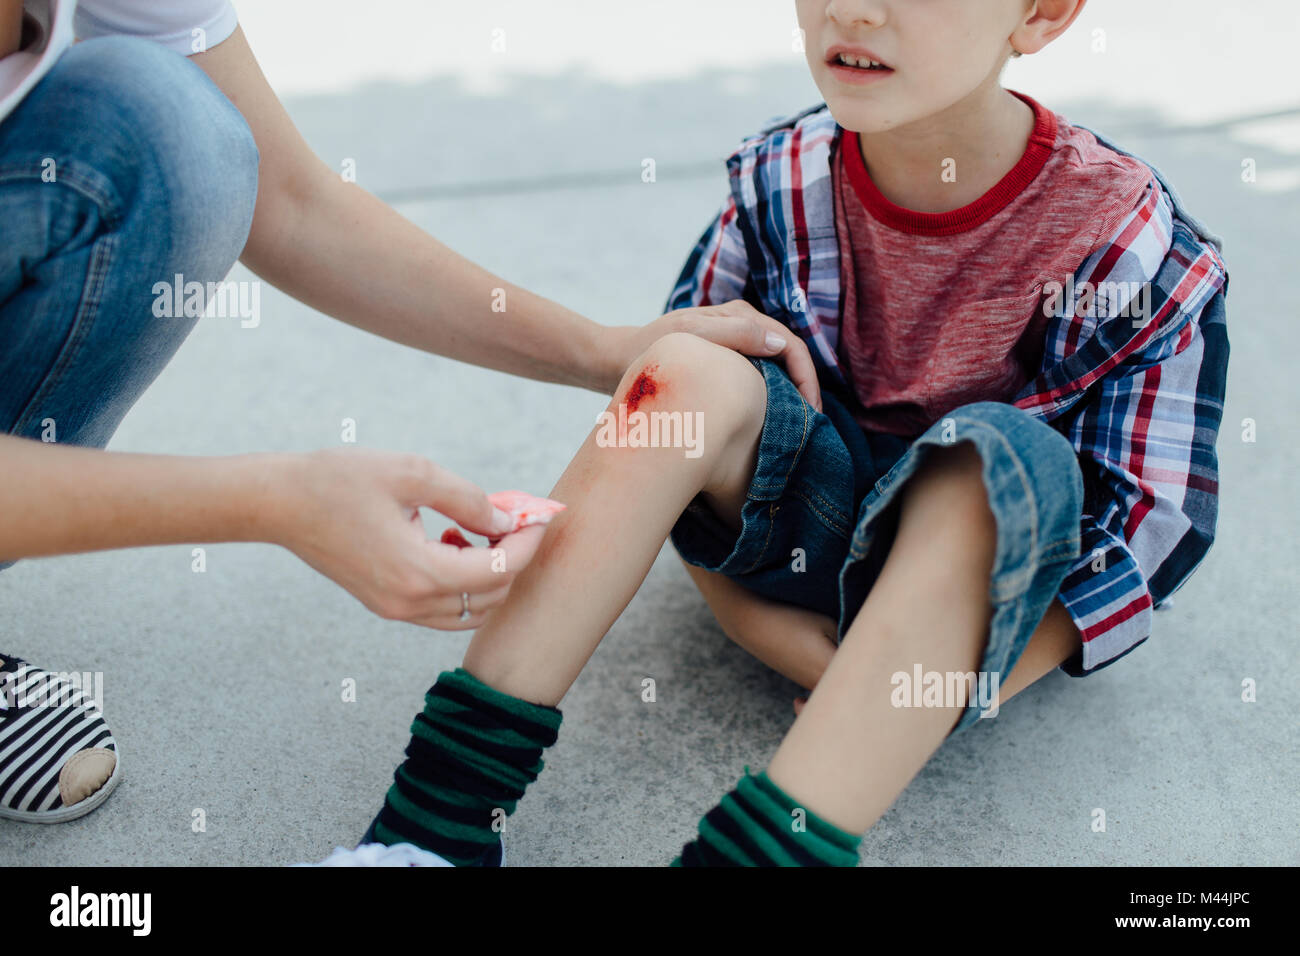 Mother nurses a bleeding knee of her son after an accident in a playground Stock Photo